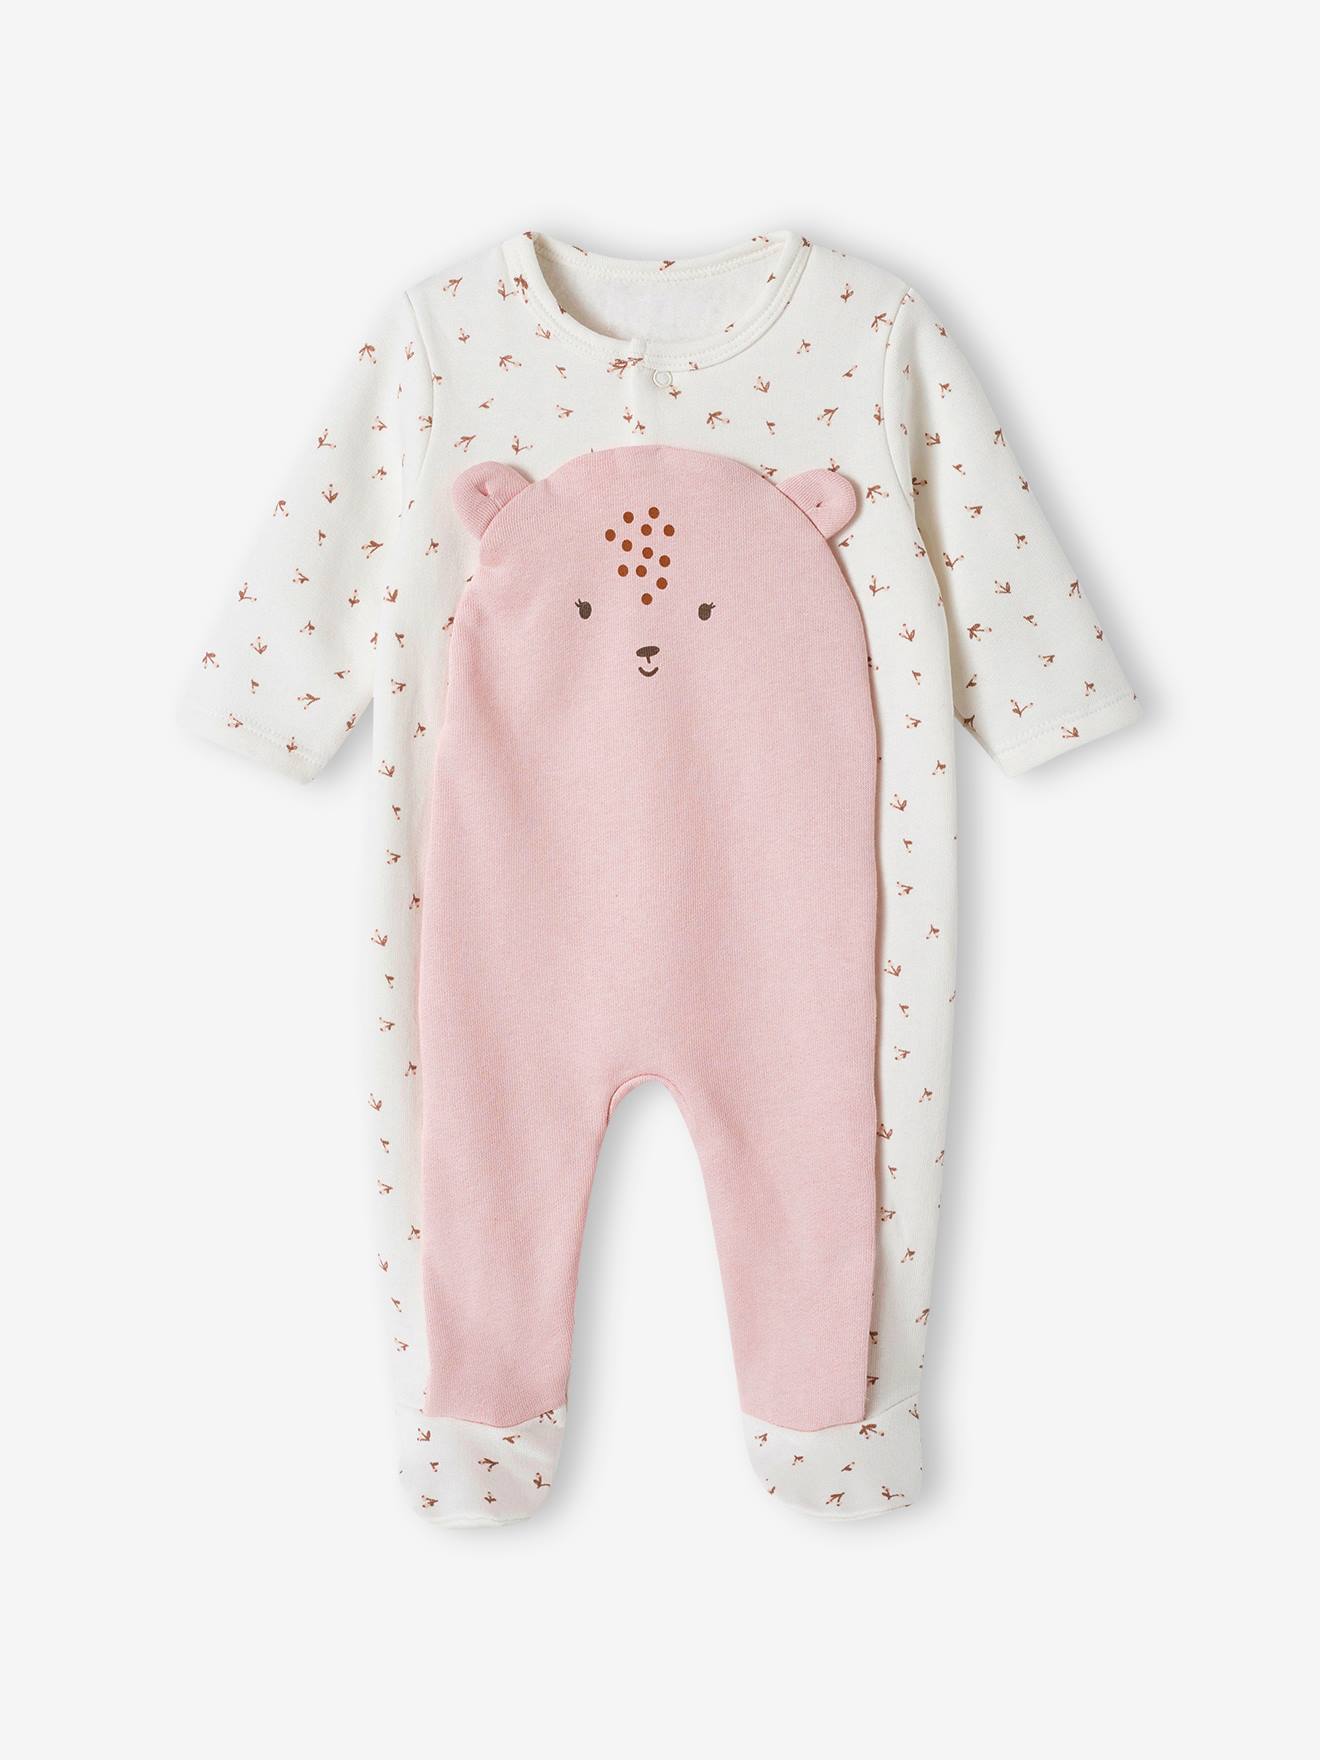 Fleece Sleepsuit for Newborn Babies, Front Flap Opening with Press Studs rosy